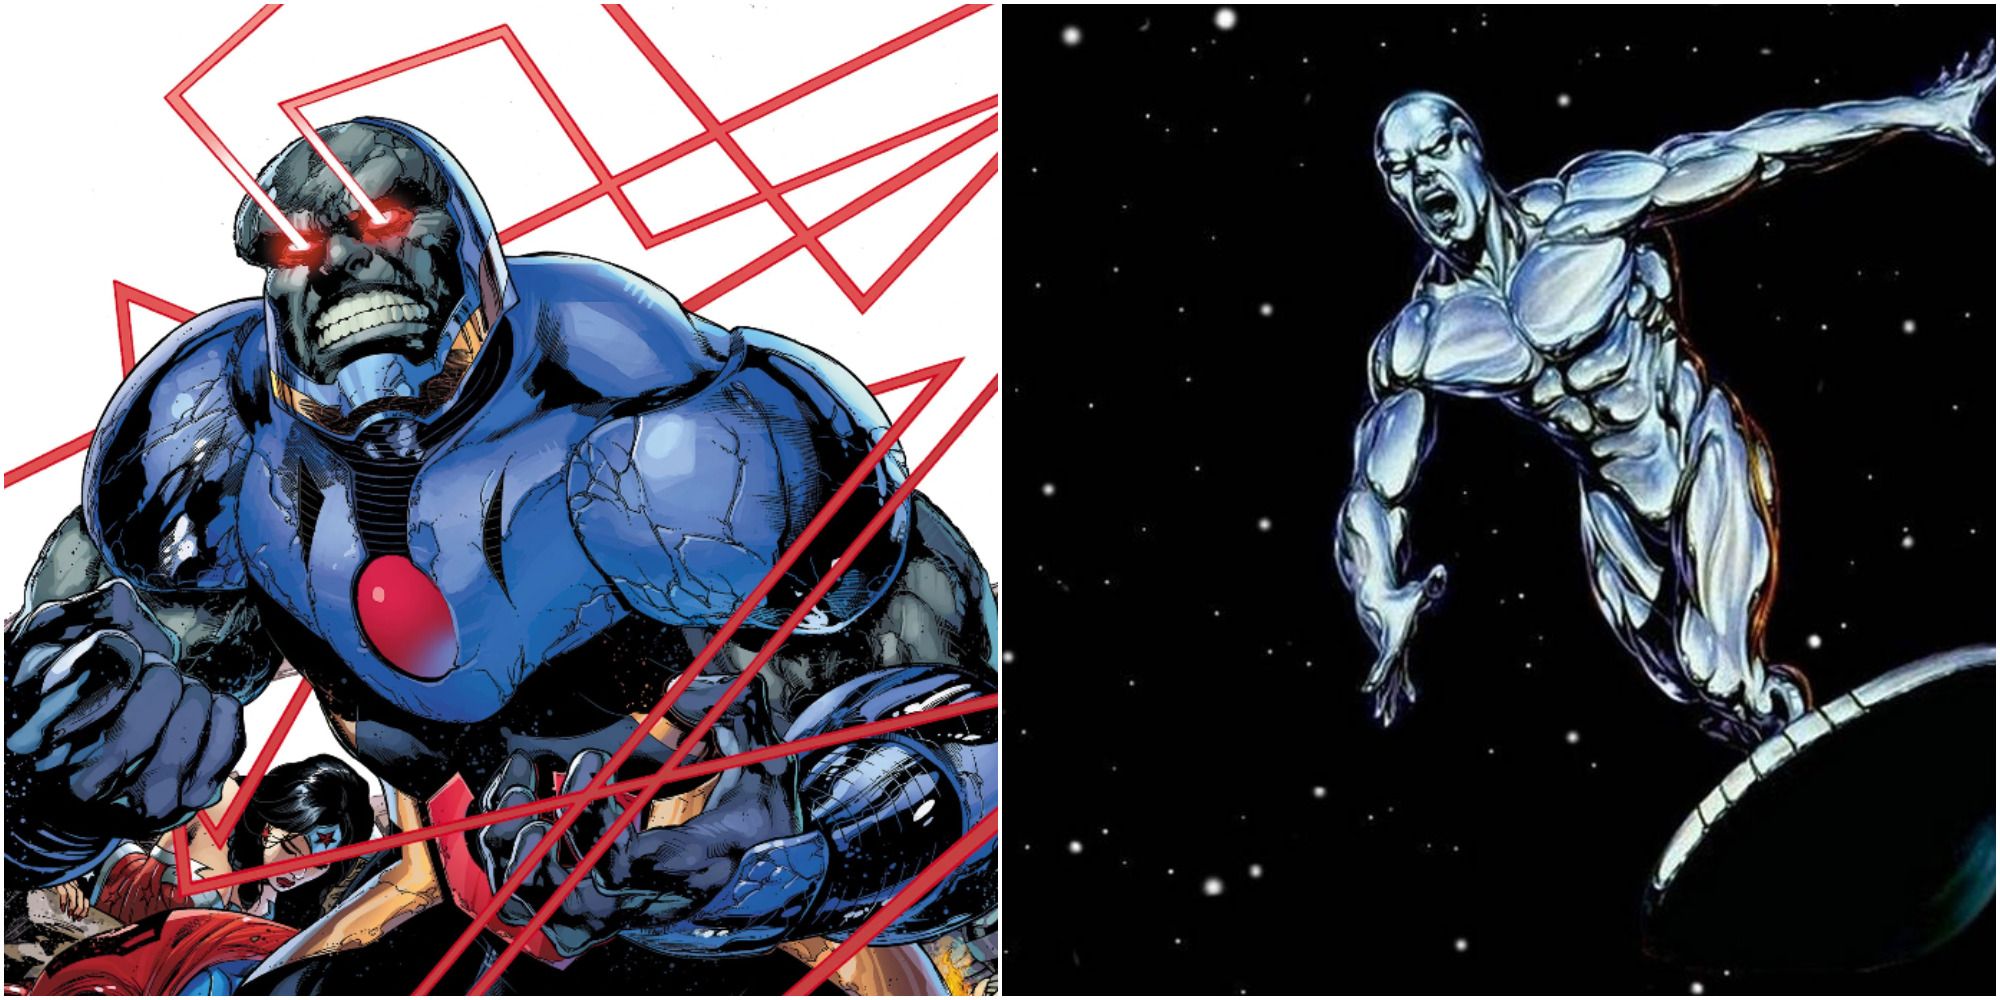 Darkseid firing Omega Beams and Silver Surfer flying through space